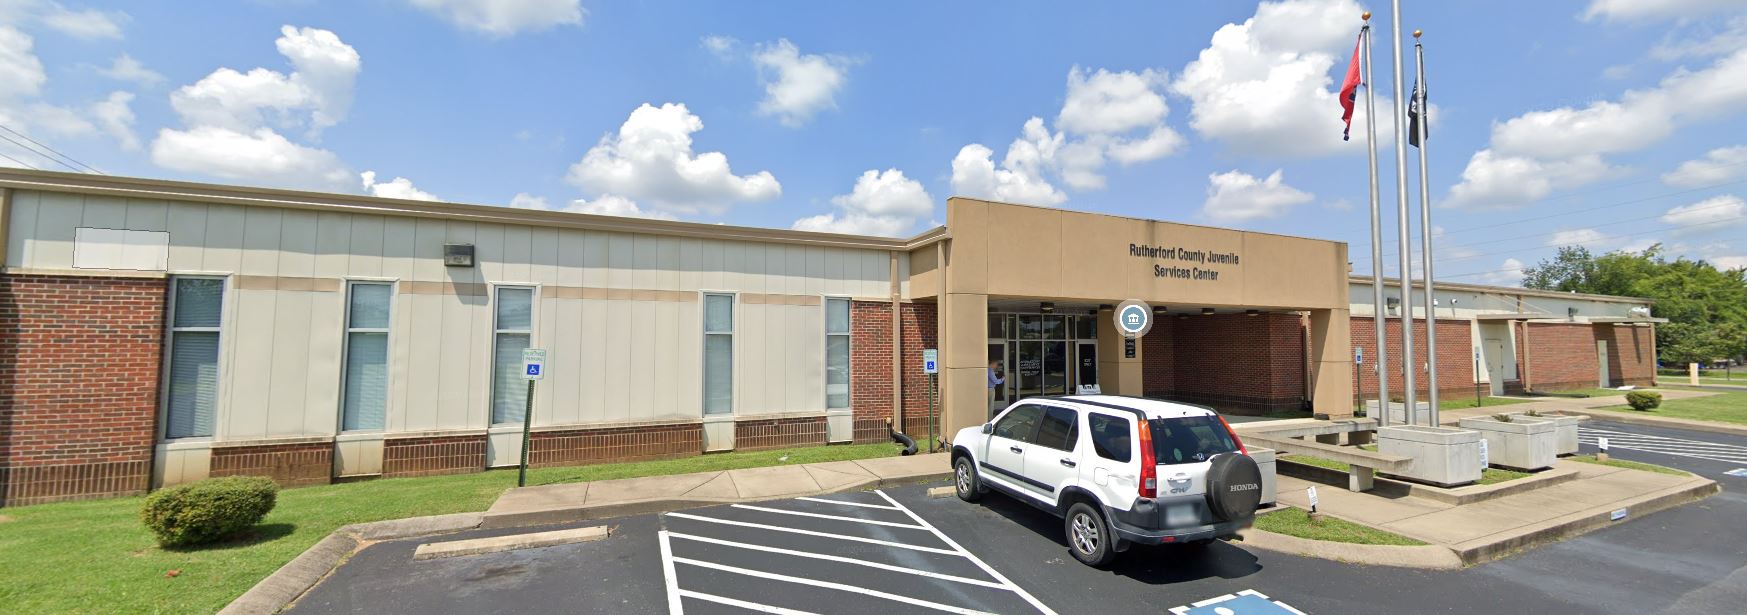 Photos Rutherford County Juvenile Detention Center 2